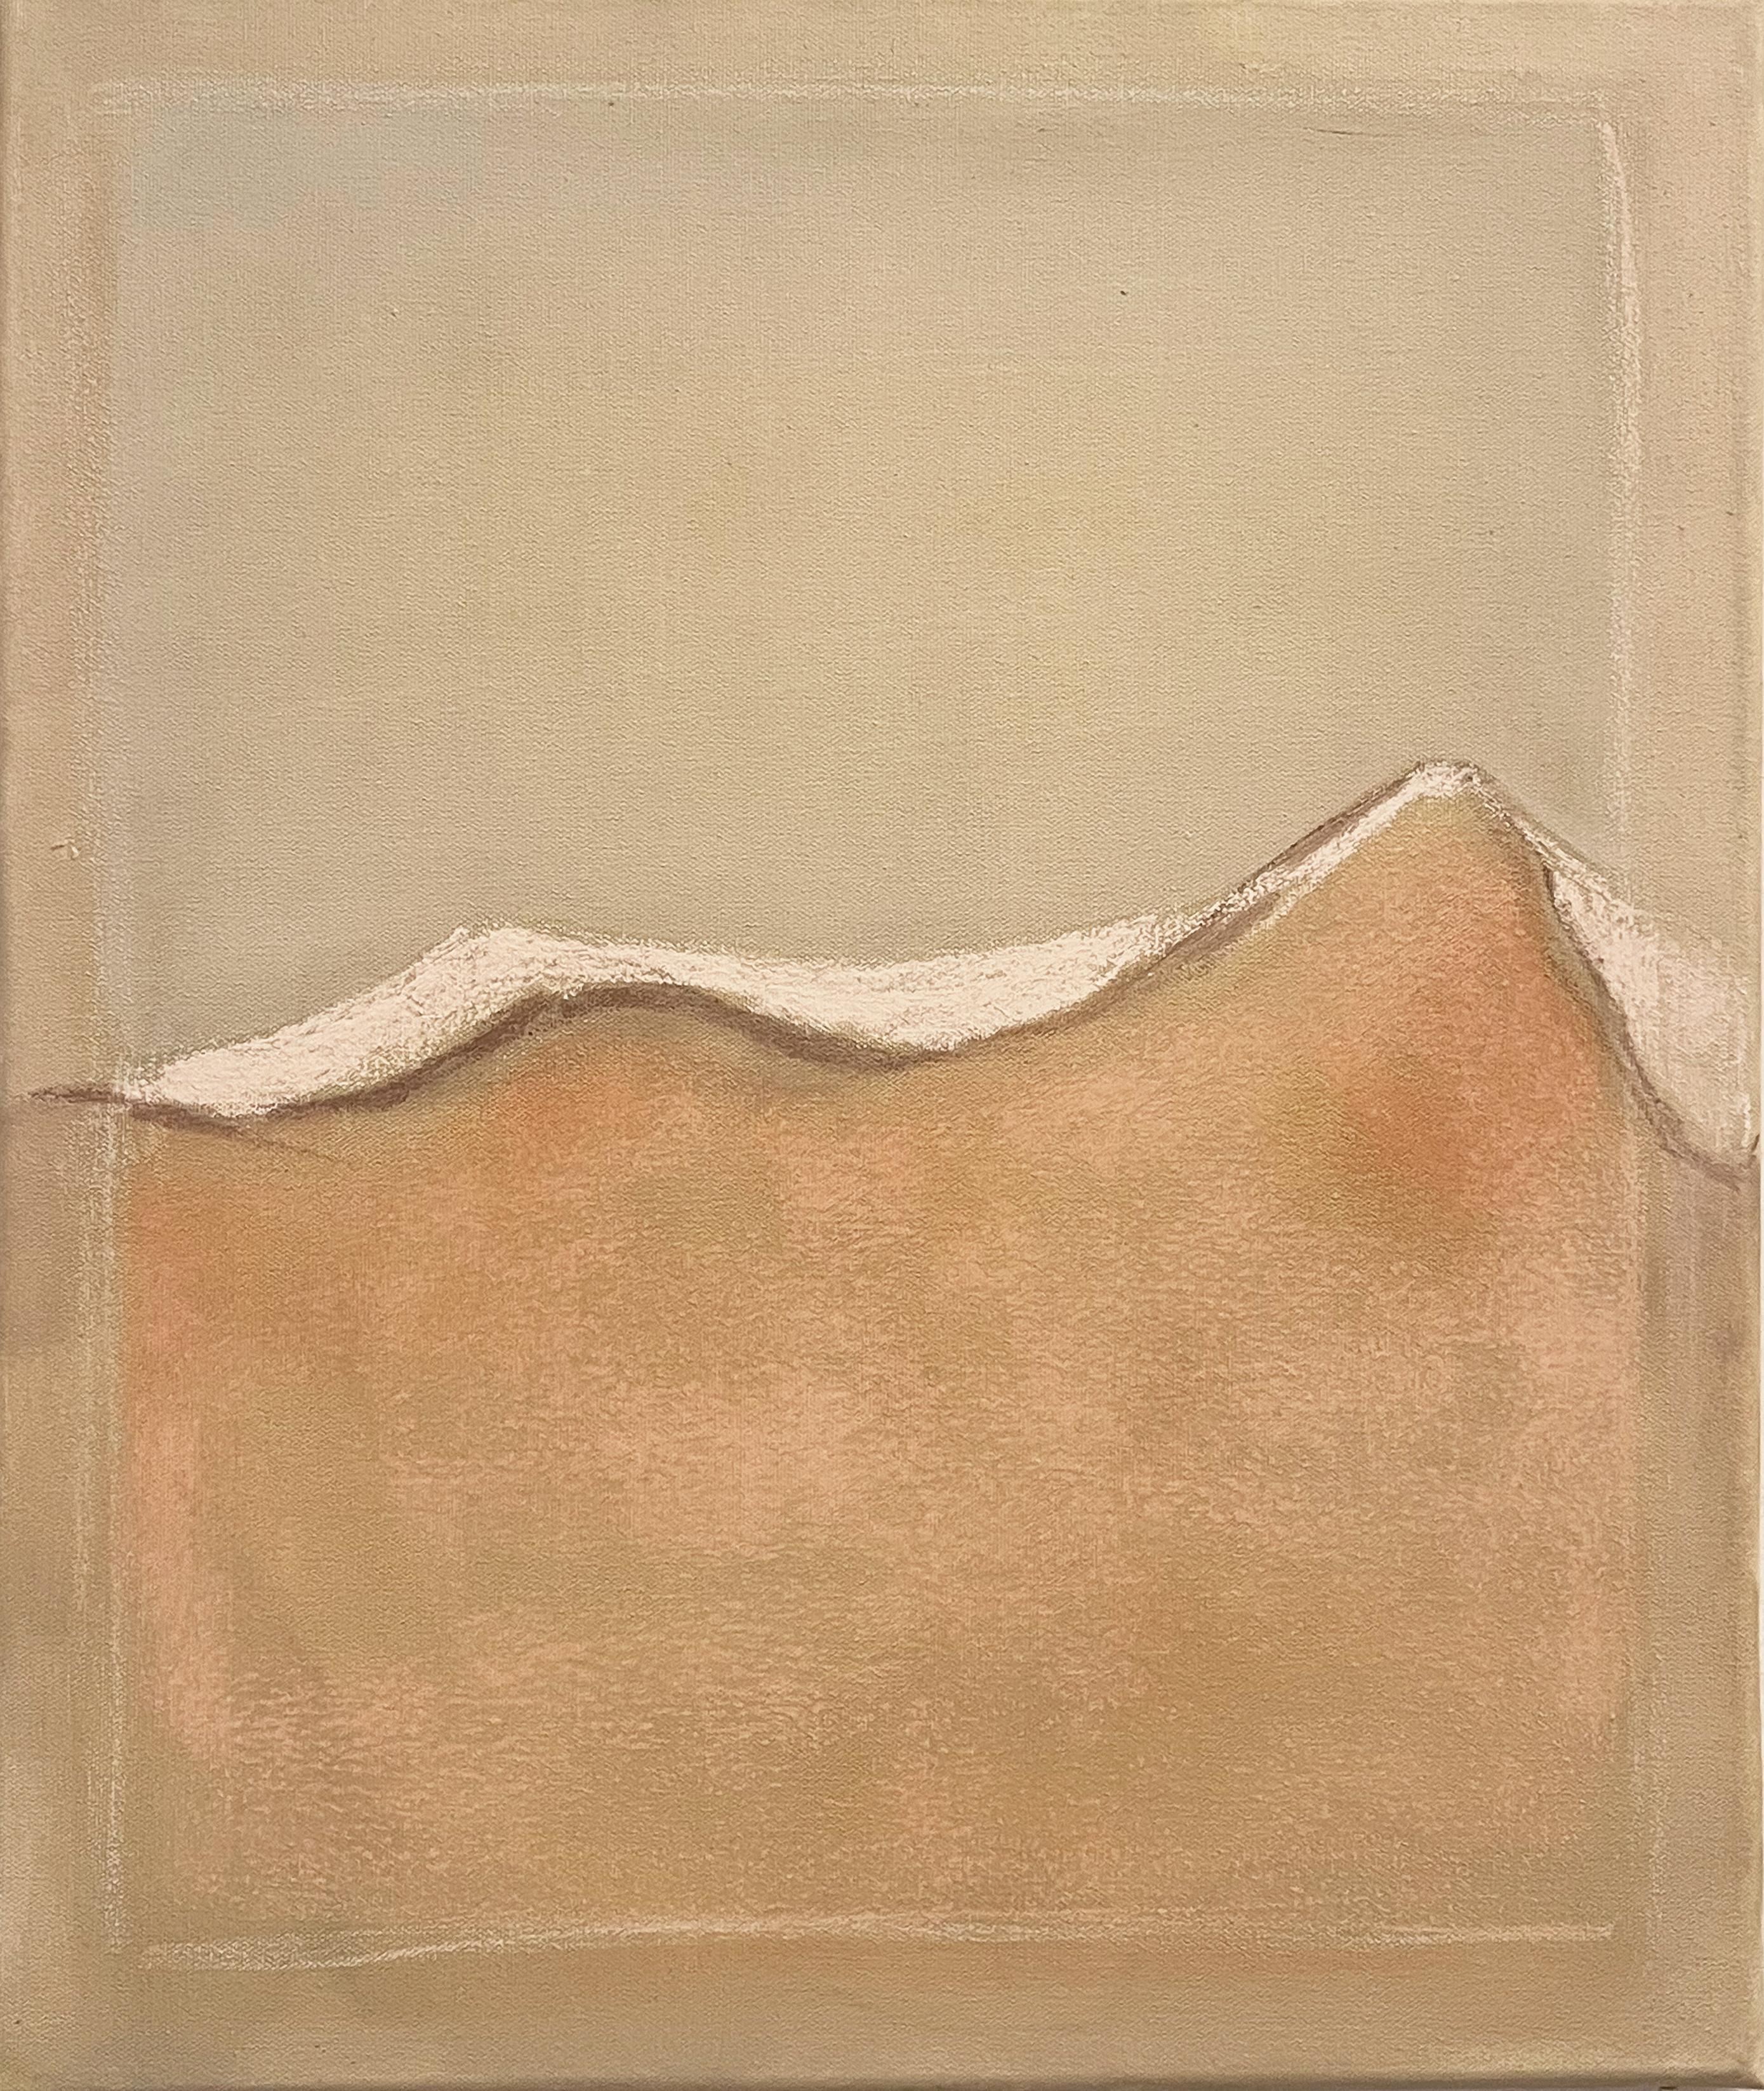 Marilina Marchica Landscape Painting - " Landscape" Minimalist Paint on Canvas Made in Italy